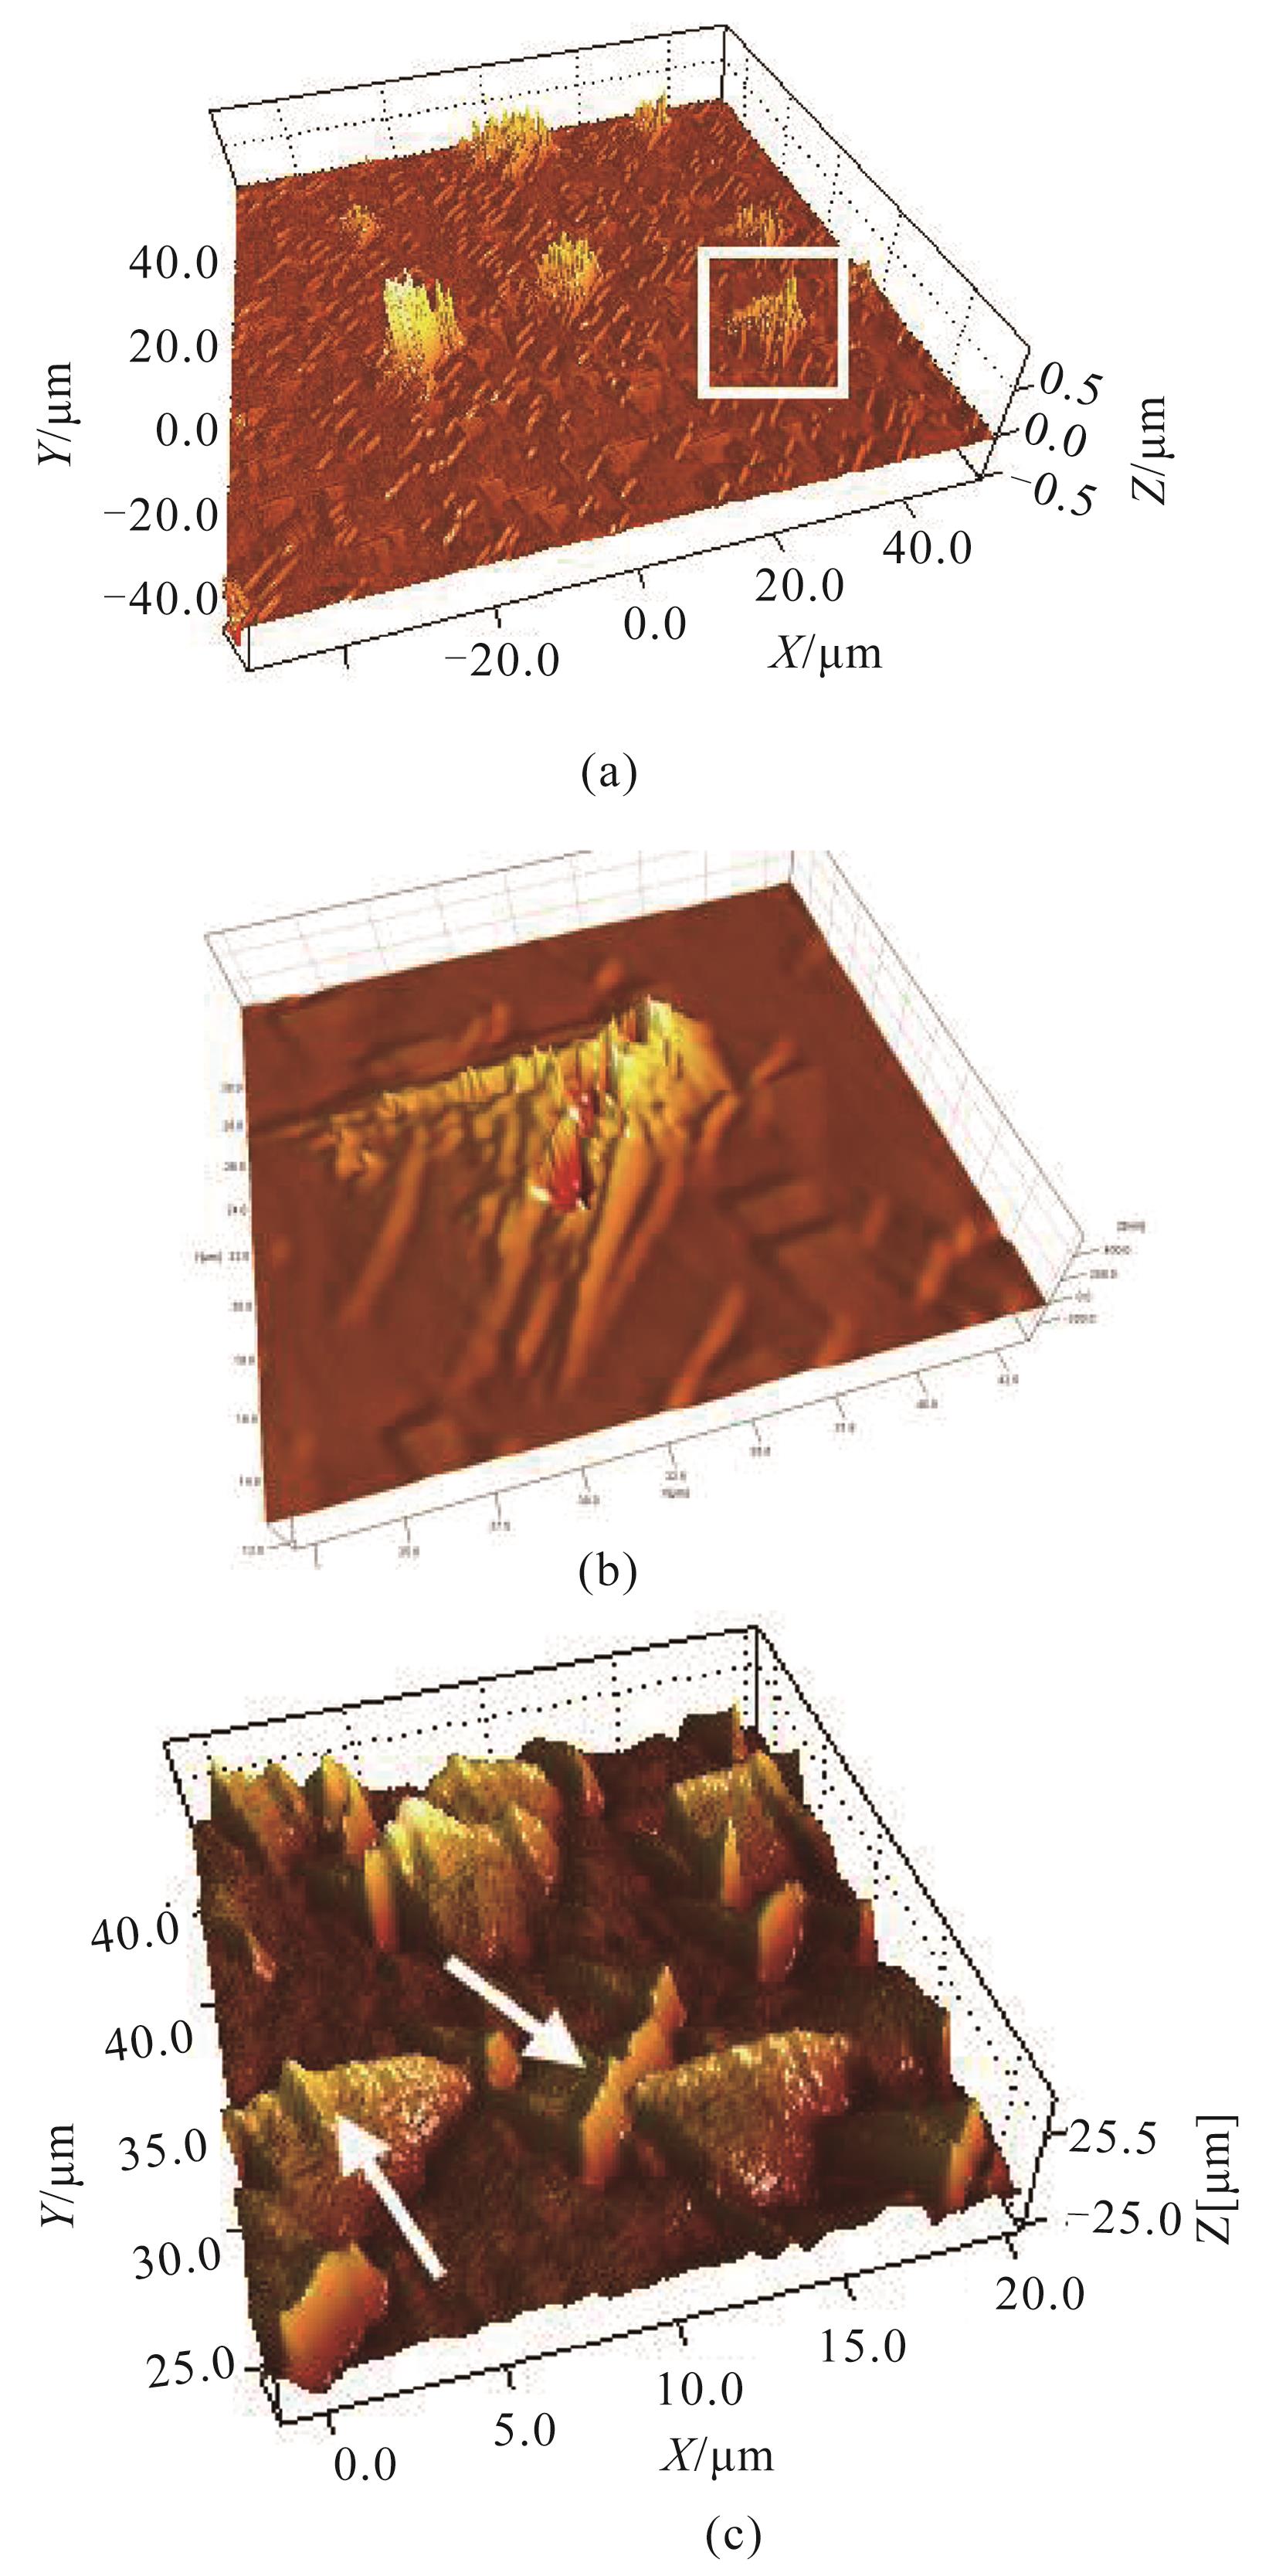 White light interferometry images of HgCdTe surface （a） 100 μm×100 μm area，（b） defect marked in figure （a），（c） triangular defects.